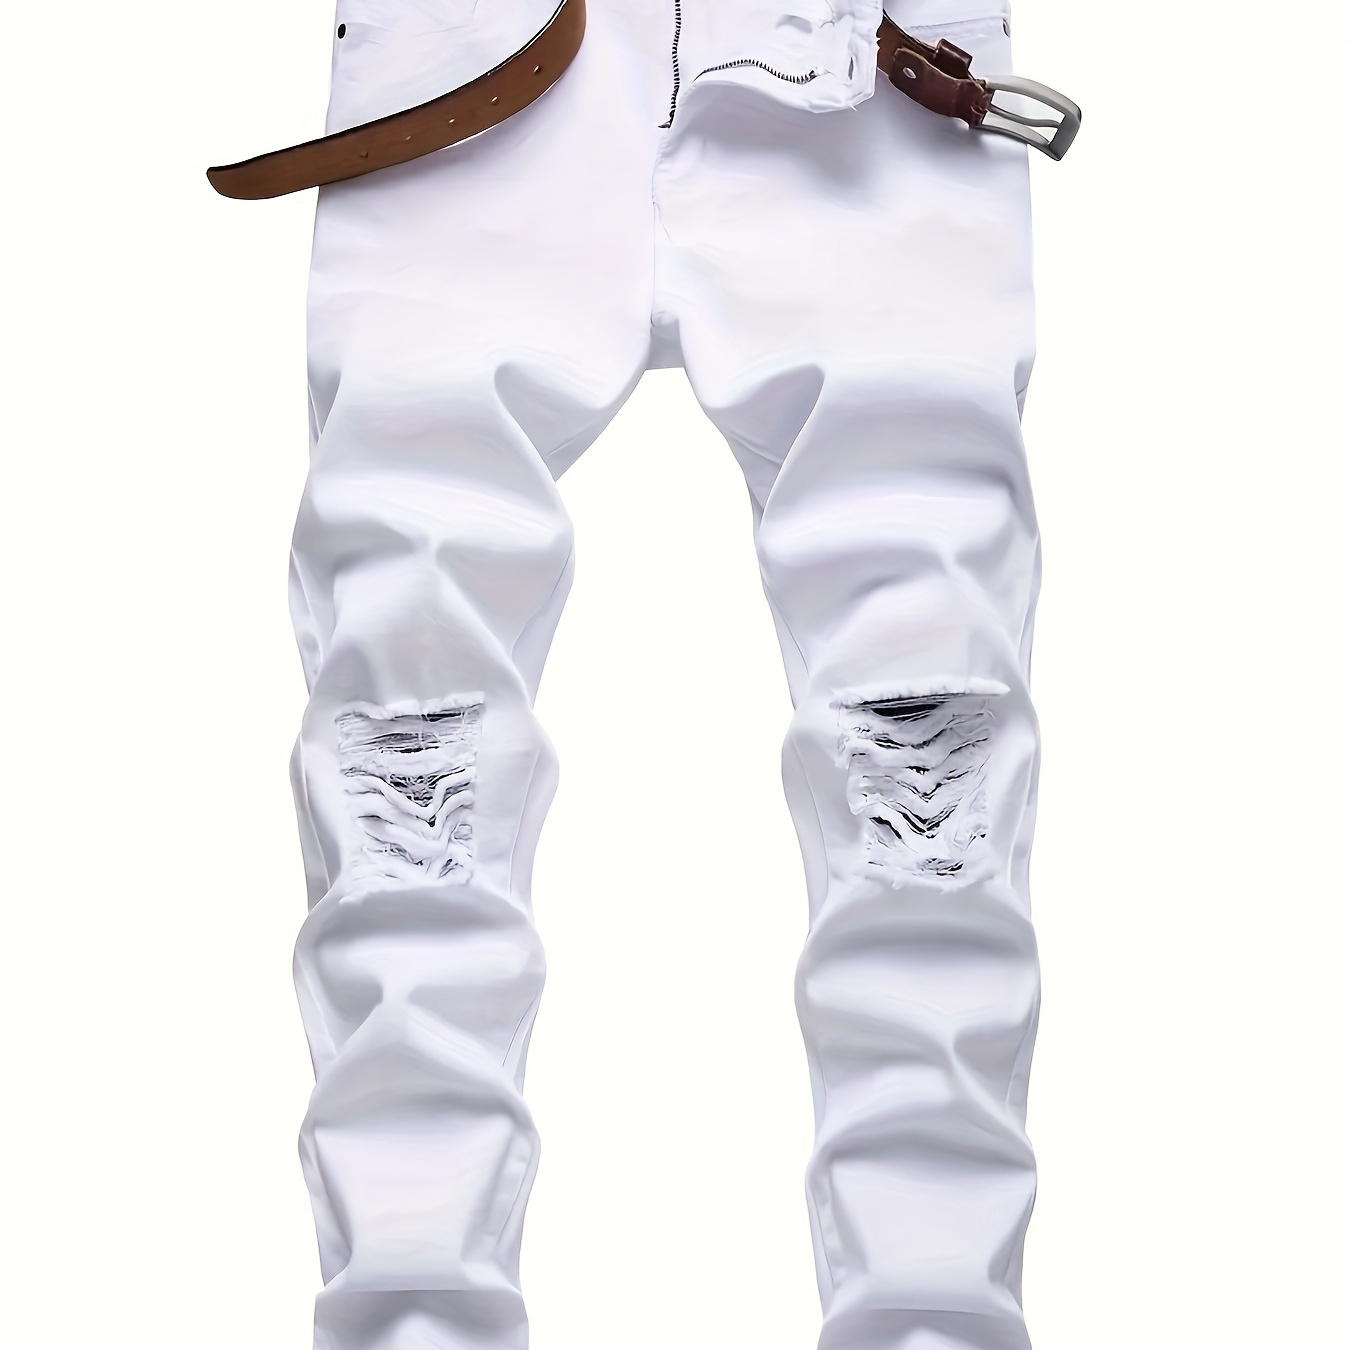 

Men's Solid Slim Fit And Cuffed Pants With Ripped Pieces And Pockets, Casual And Chic Pants For Leisurewear